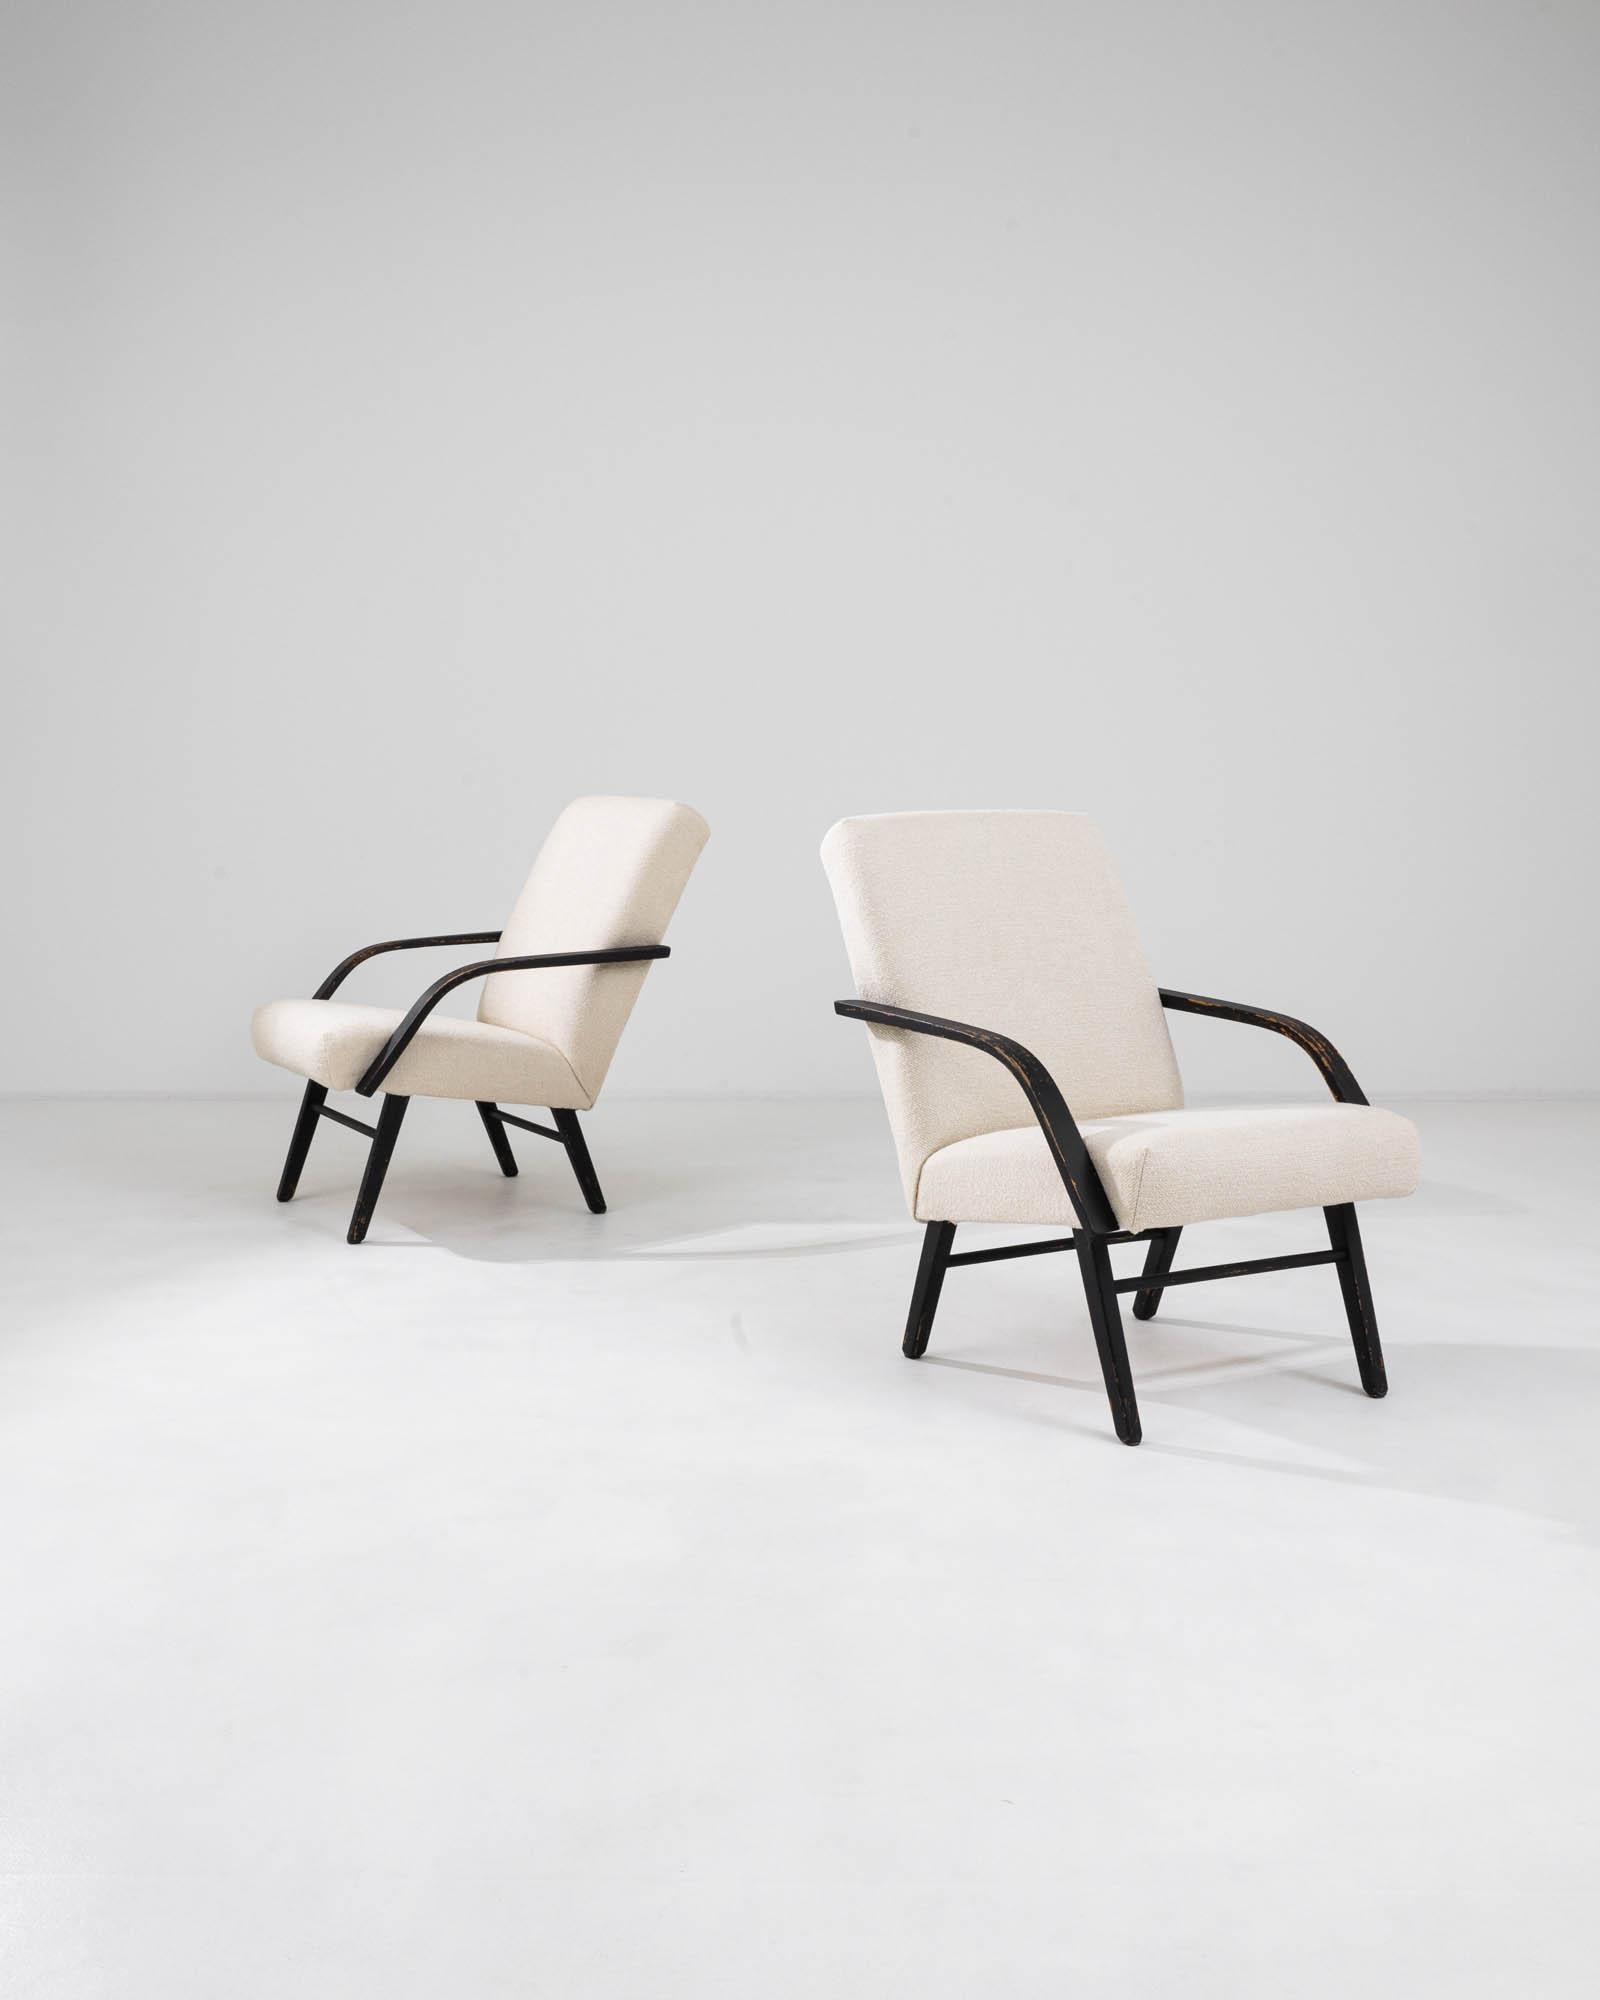 Immerse yourself in the mid-century allure with a set of two 1960s Czechia Upholstered Chairs. Upholstered in a timeless white hue, these chairs exude elegance, while the sleek black arms and legs provide a striking contrast. Crafted with meticulous